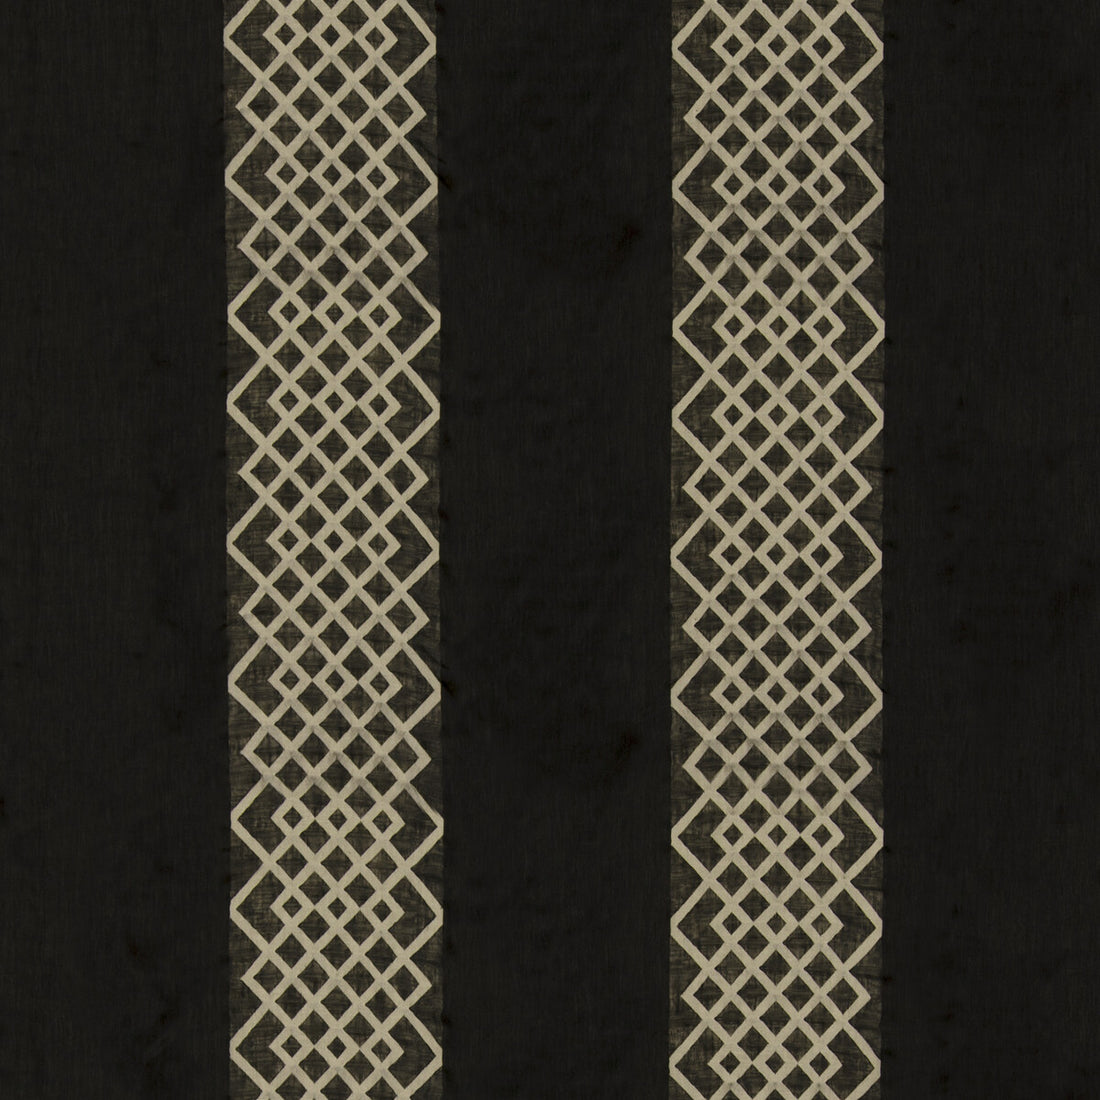 Diamond Sheer fabric in ebony color - pattern ED95007.955.0 - by Threads in the Meridian collection